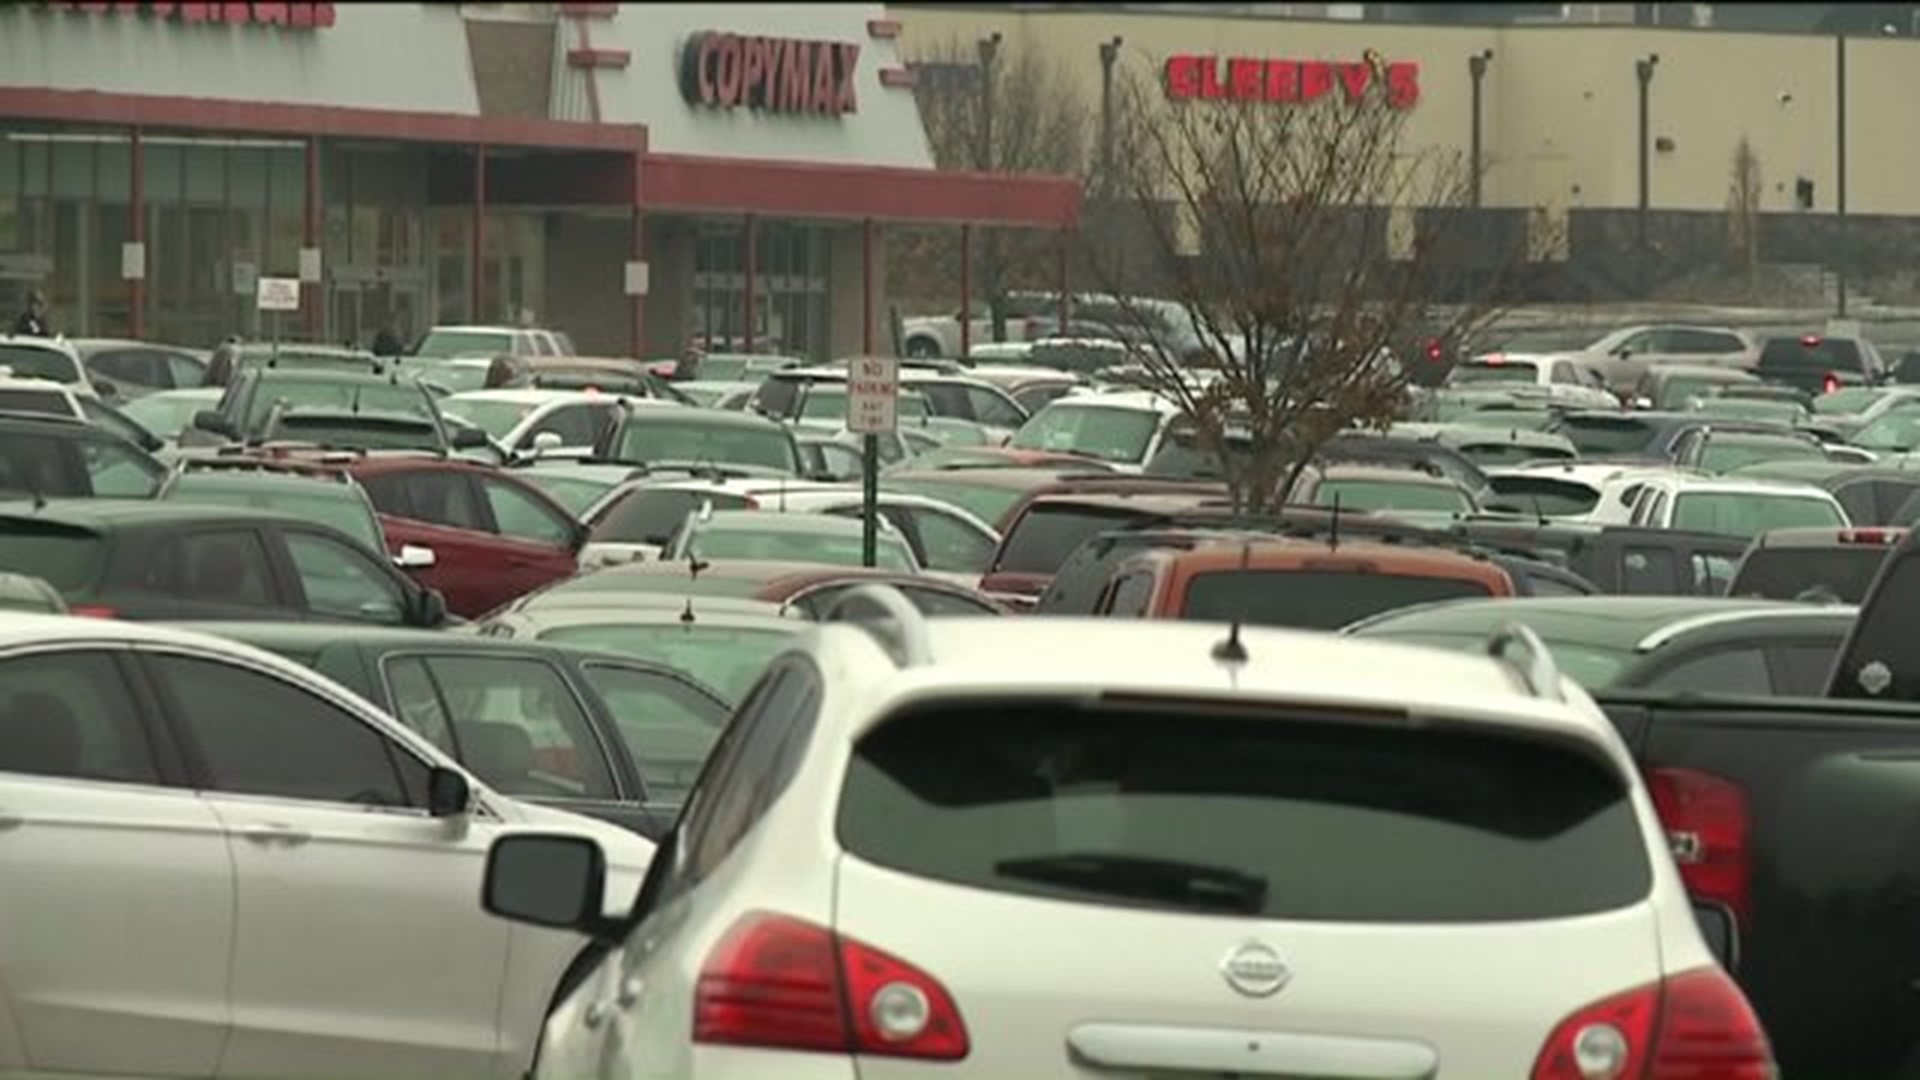 Shoppers Pack Parking Lots in Luzerne County